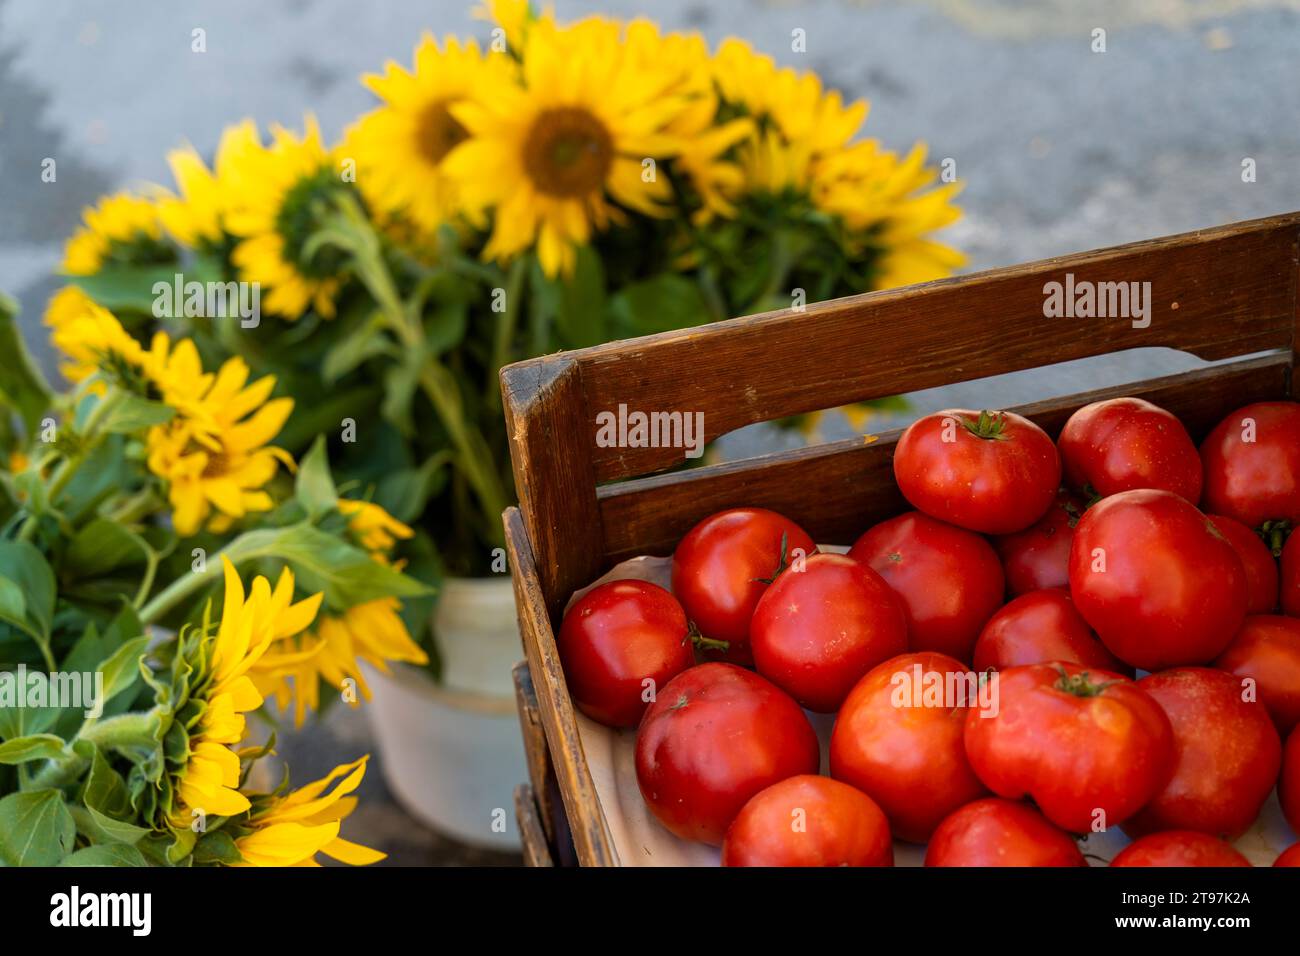 Crates of juicy red tomatoes near sunflowers at farmer's market Stock Photo